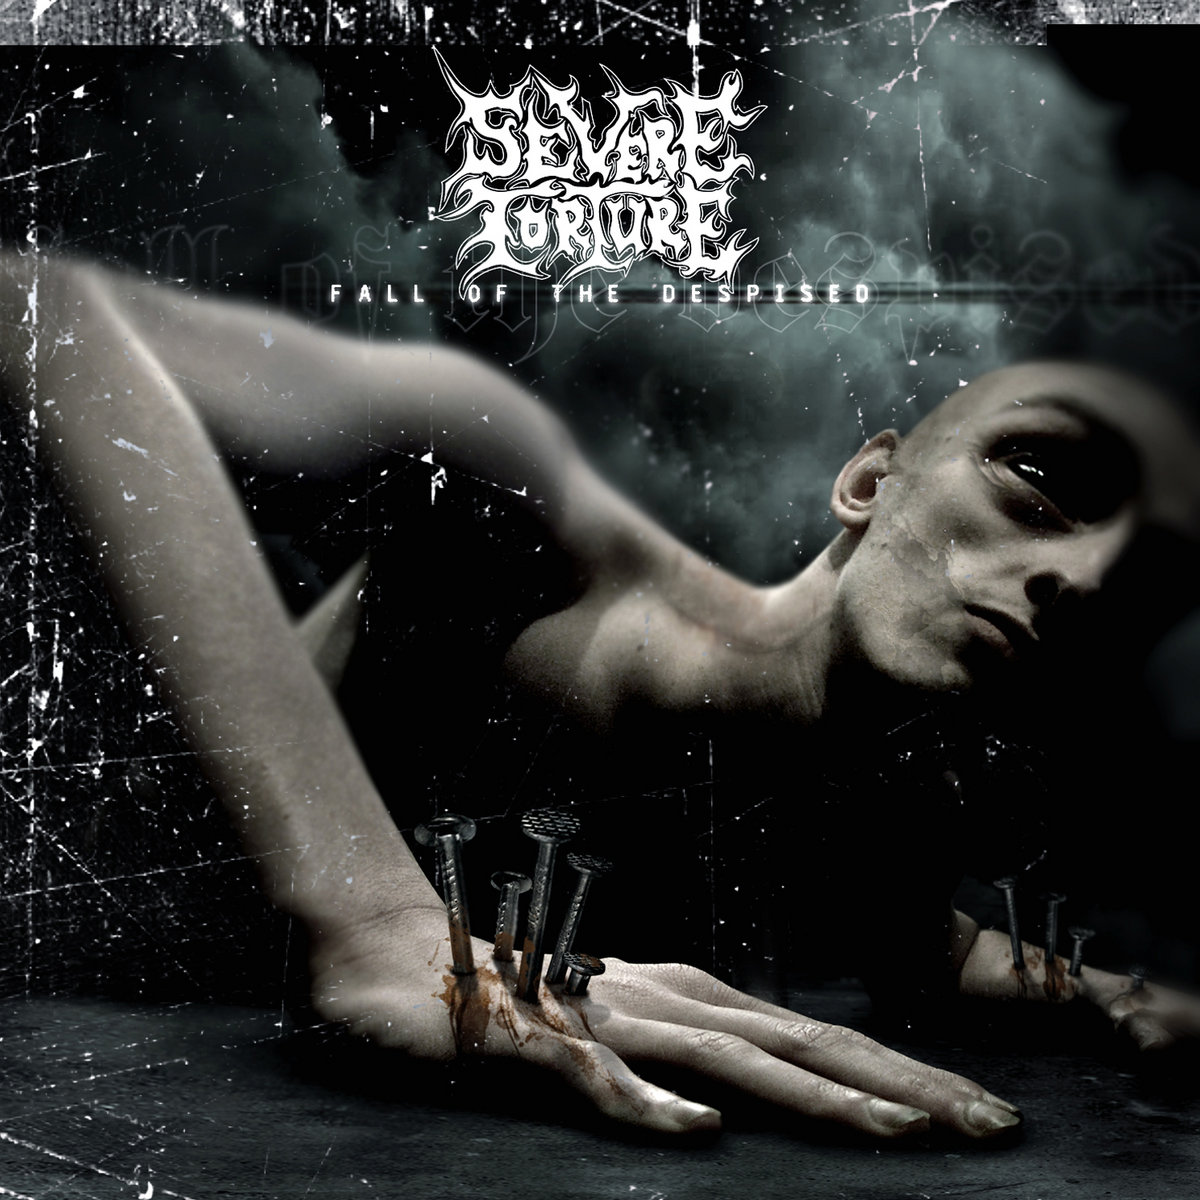 severe torture – fall of the despised